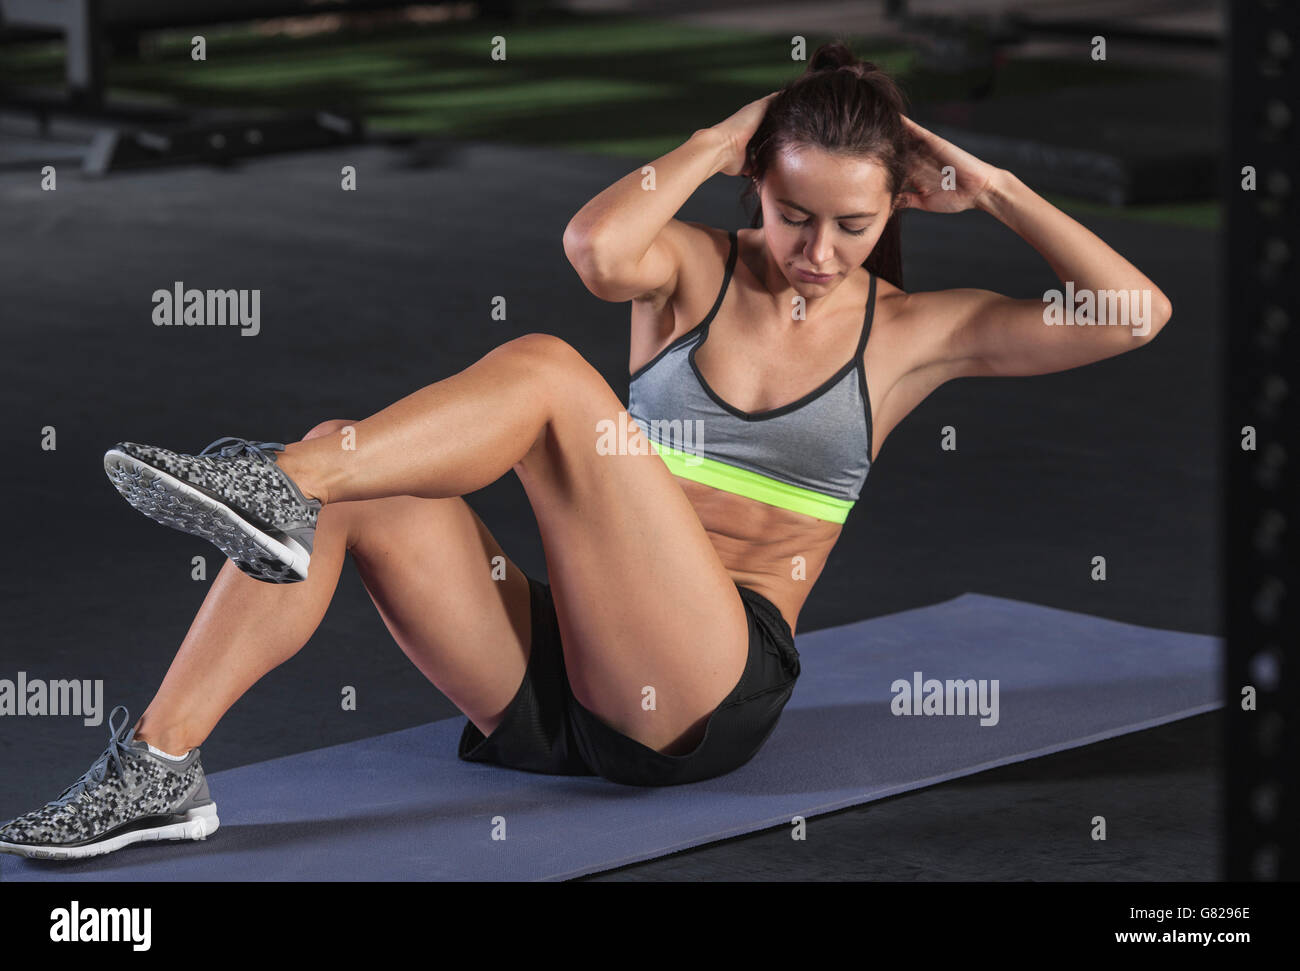 Young woman doing sit-ups on exercise mat at gym Banque D'Images